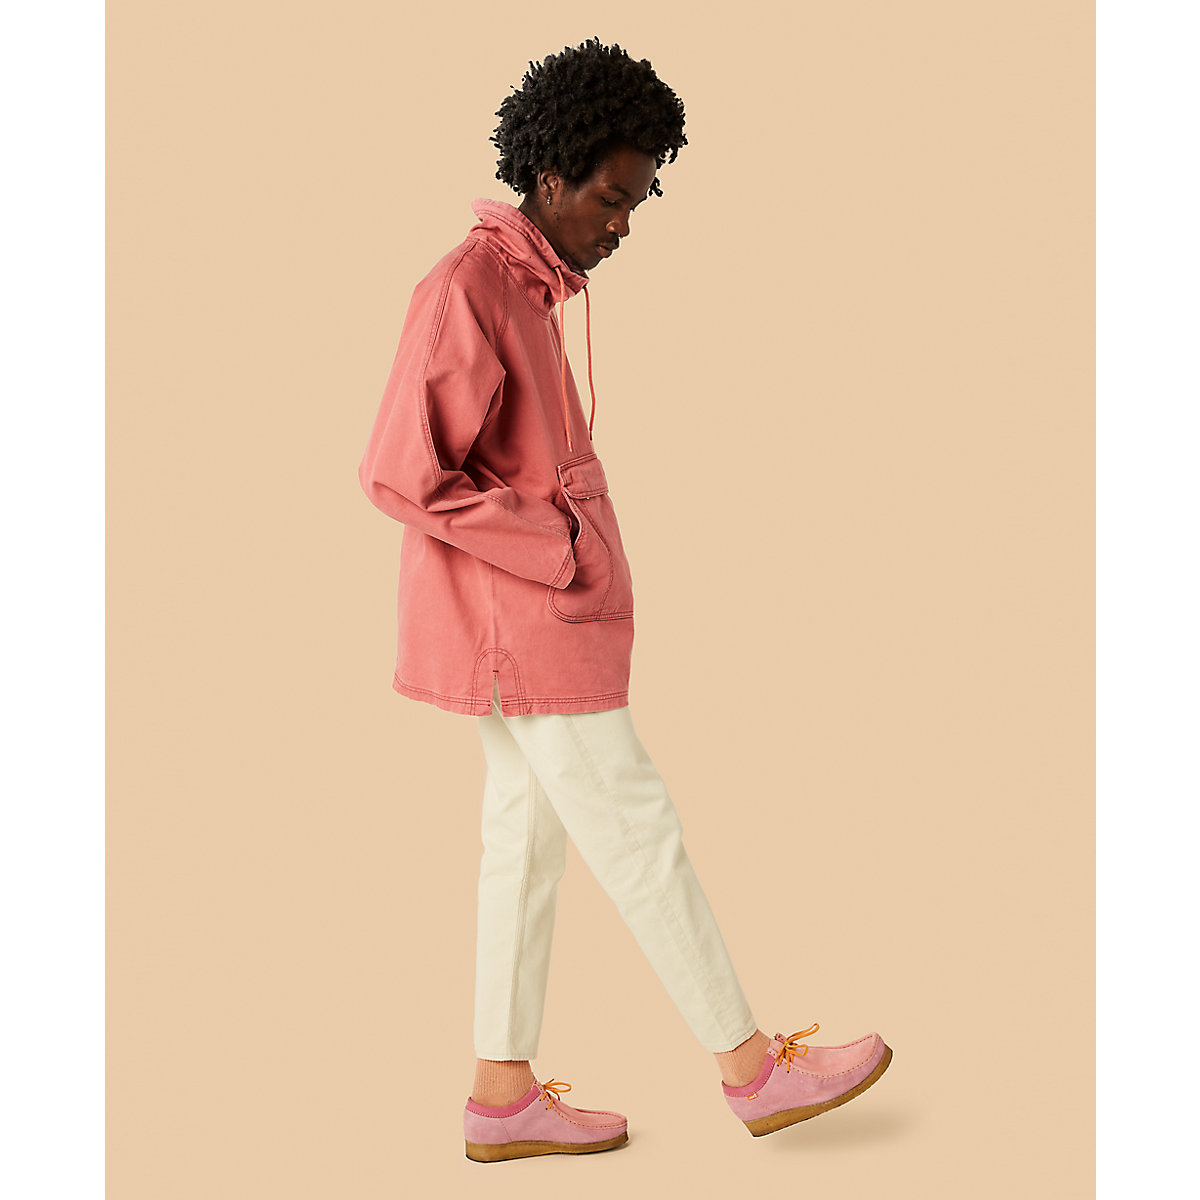 Levi's® Vintage Clothing x Clarks Originals®Wallabee Pink  Combination｜リーバイス® 公式通販